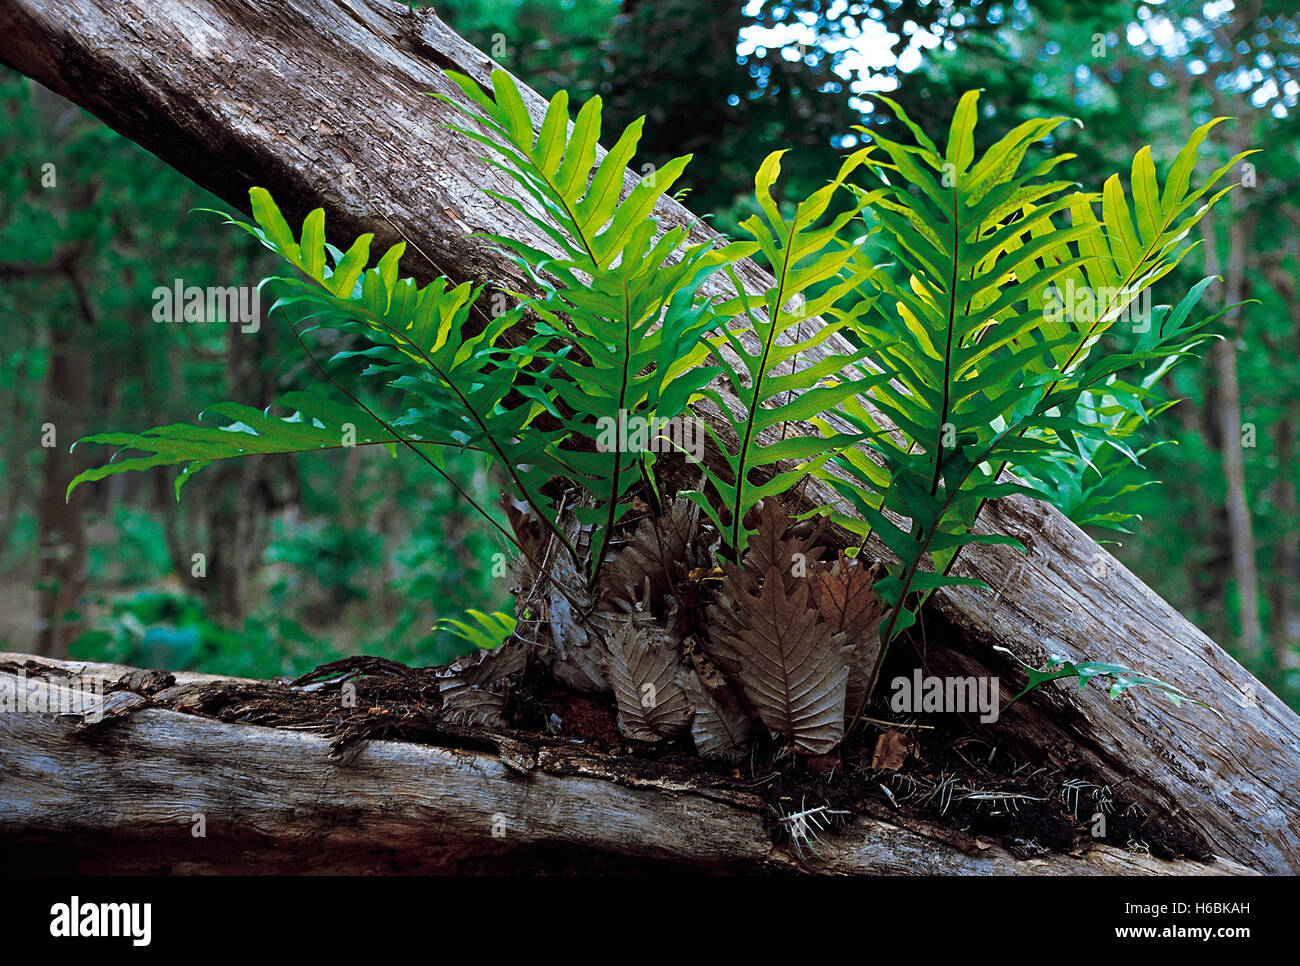 Drynaria Quercifolia. An epiphytic fern with beautiful foliage. This fern has two kinds of leaves - green leaves at the top and Stock Photo